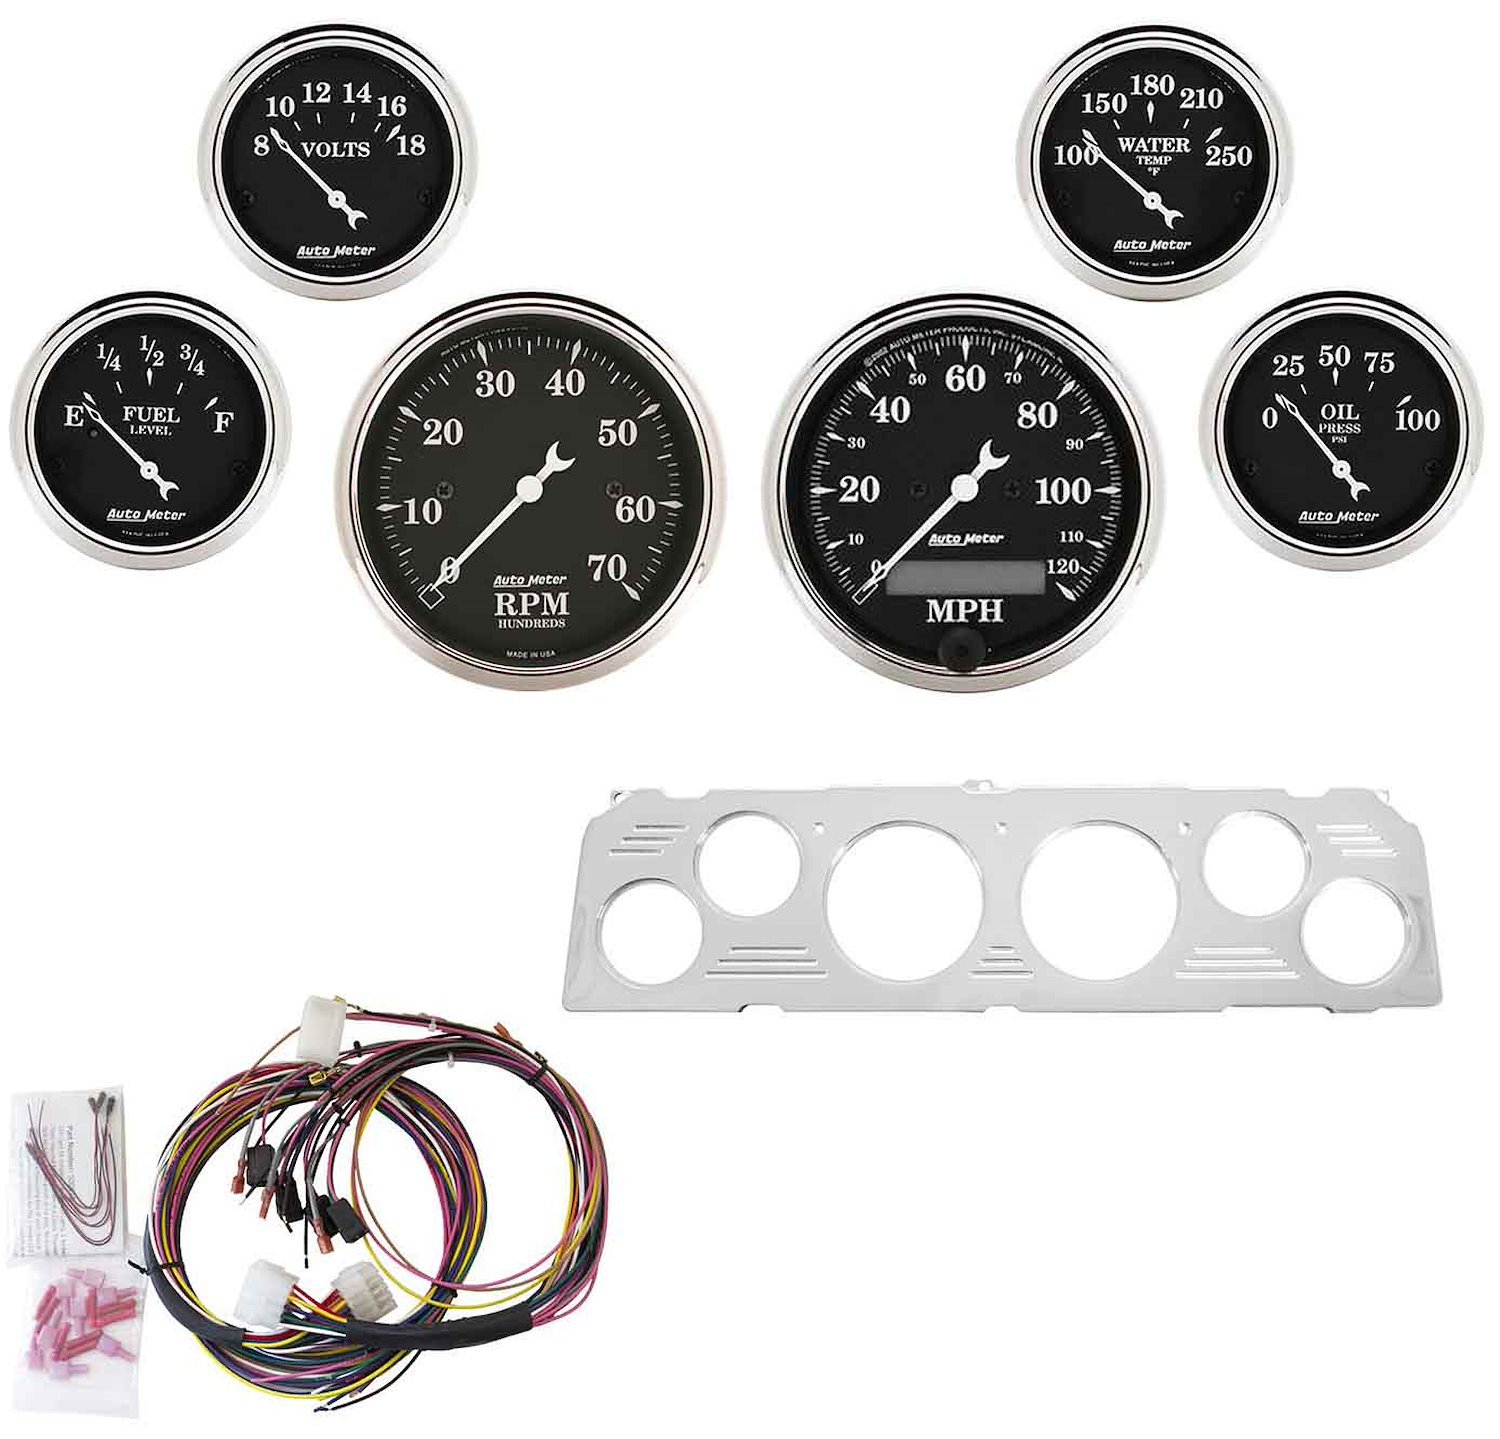 6-Gauge Direct-Fit Dash Kit 1964-1966 Chevy Truck - Old Tyme Black Series - Polished Panel